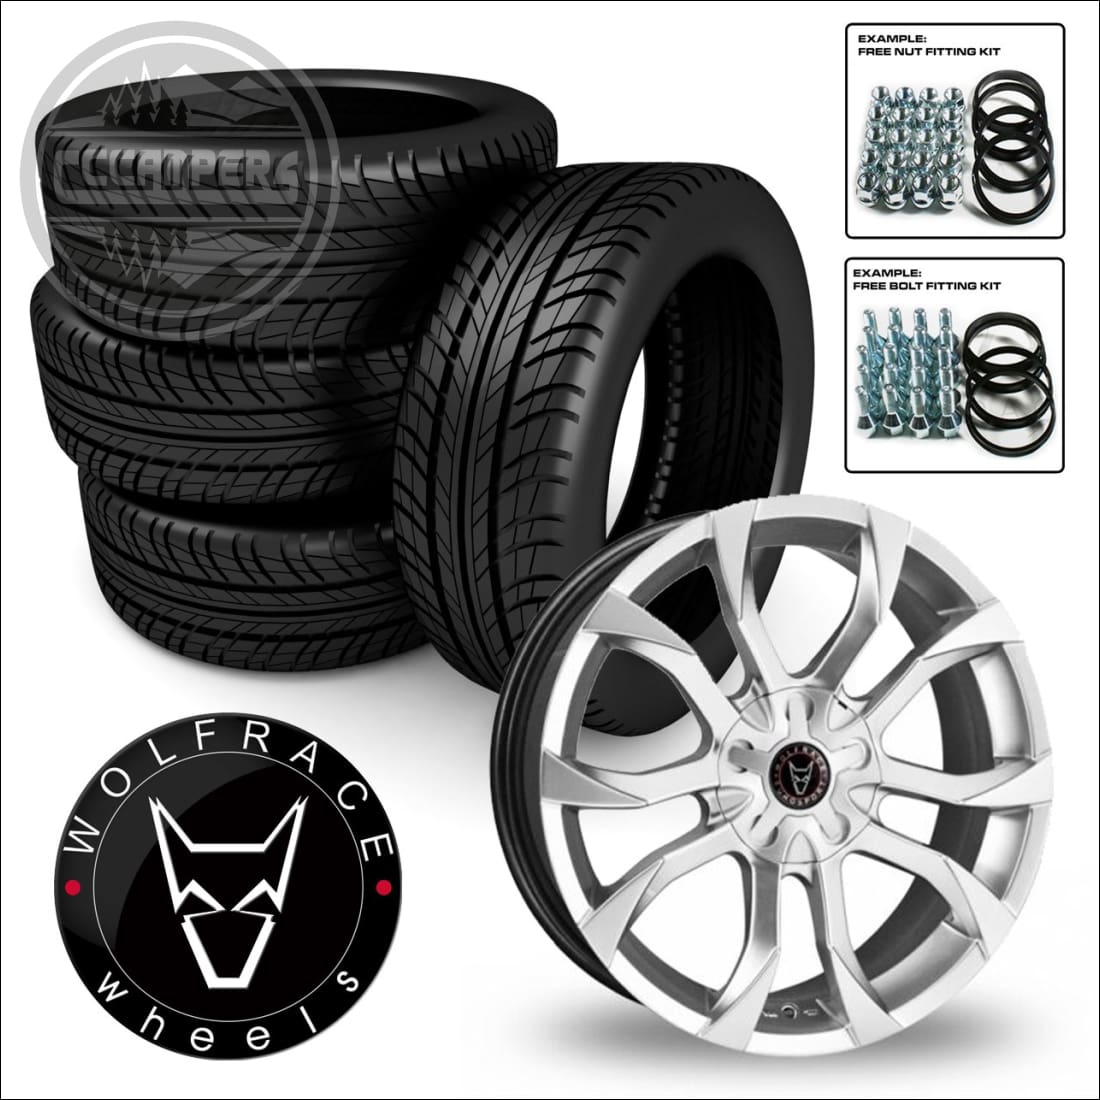 WOLFRACE ASSASSIN 18" load rated alloy wheel and tyre package 14> on Renault Trafic, Vauxhall Vivaro, Nissan NV300 & Fiat Talento - cccampers.myshopify.com